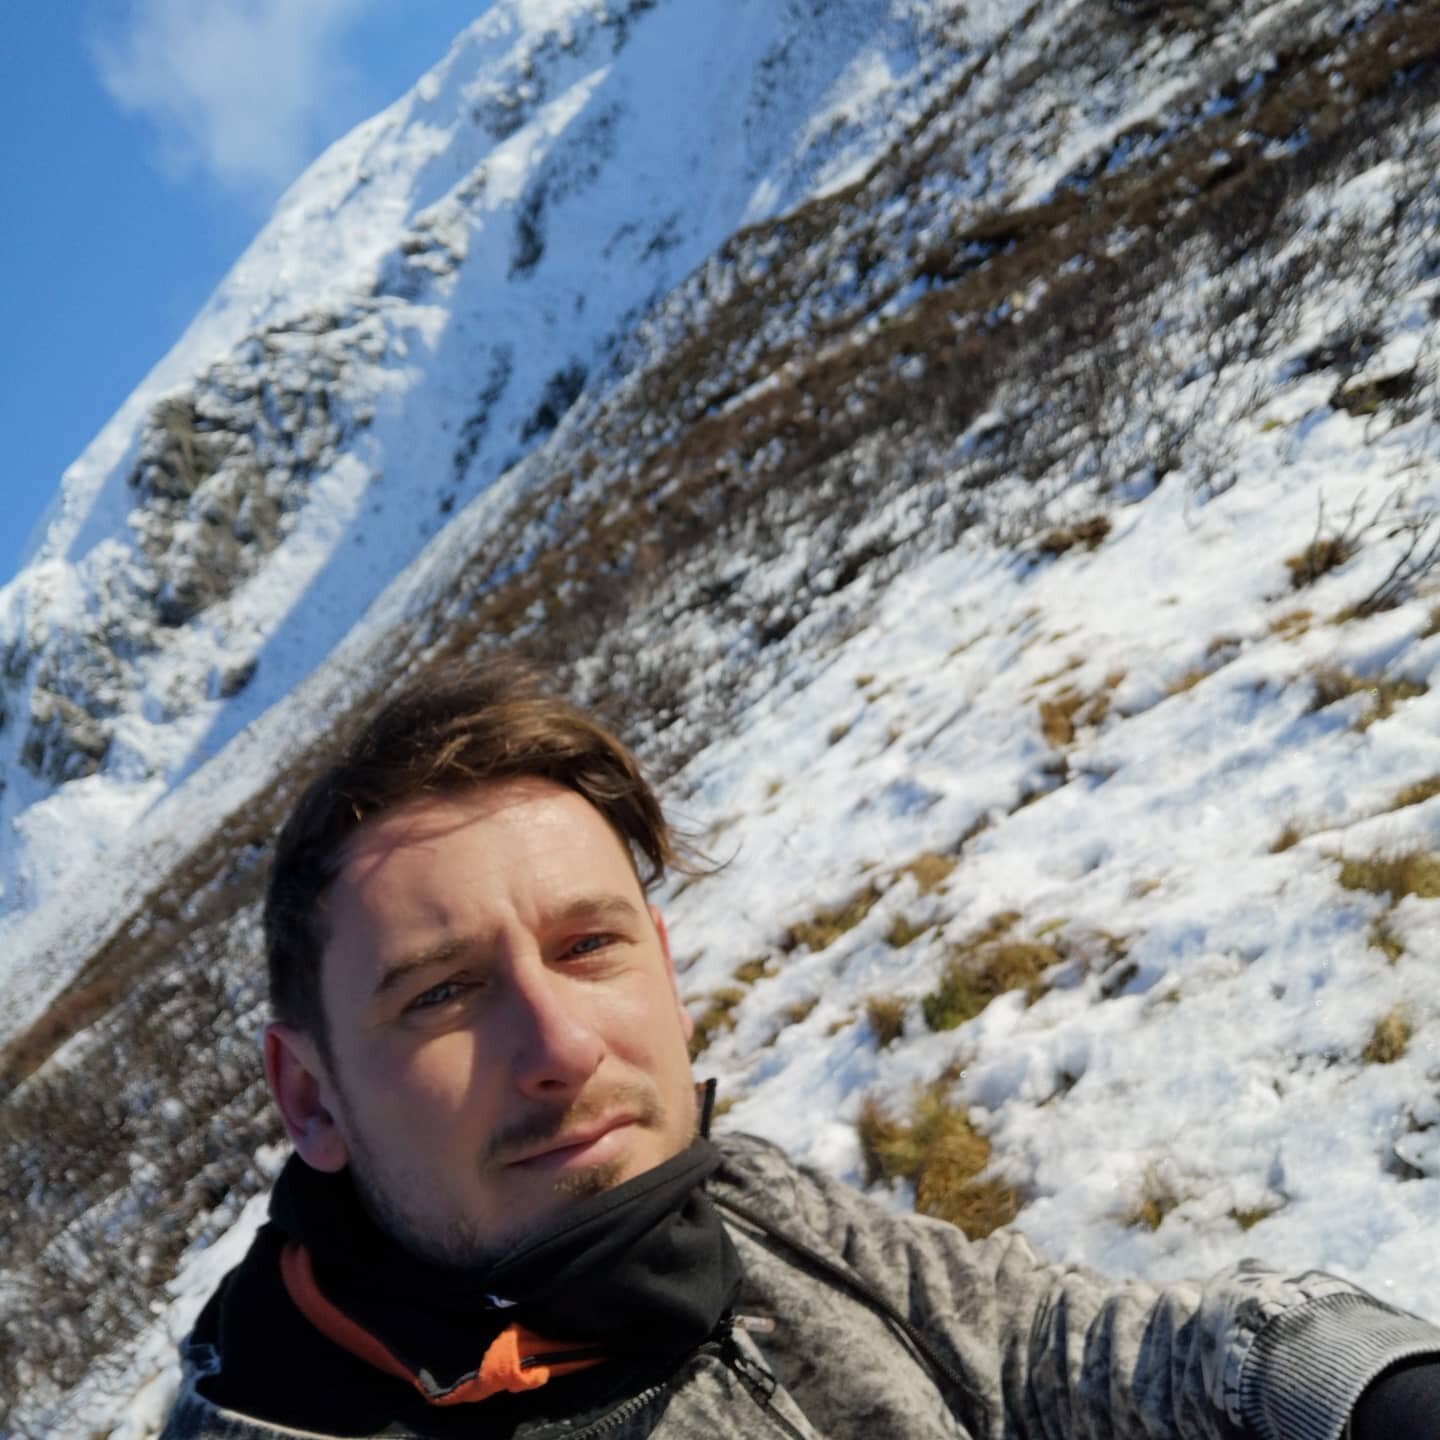 Aside from nearly breaking my neck, all in all a good little hike. 

Thankful for some headspace to kick start the New Year

#outdoors #winter #hiking #snow #scotland #nature #mentalhealth #menshealth #motivation #business #marketing #strategy #healt